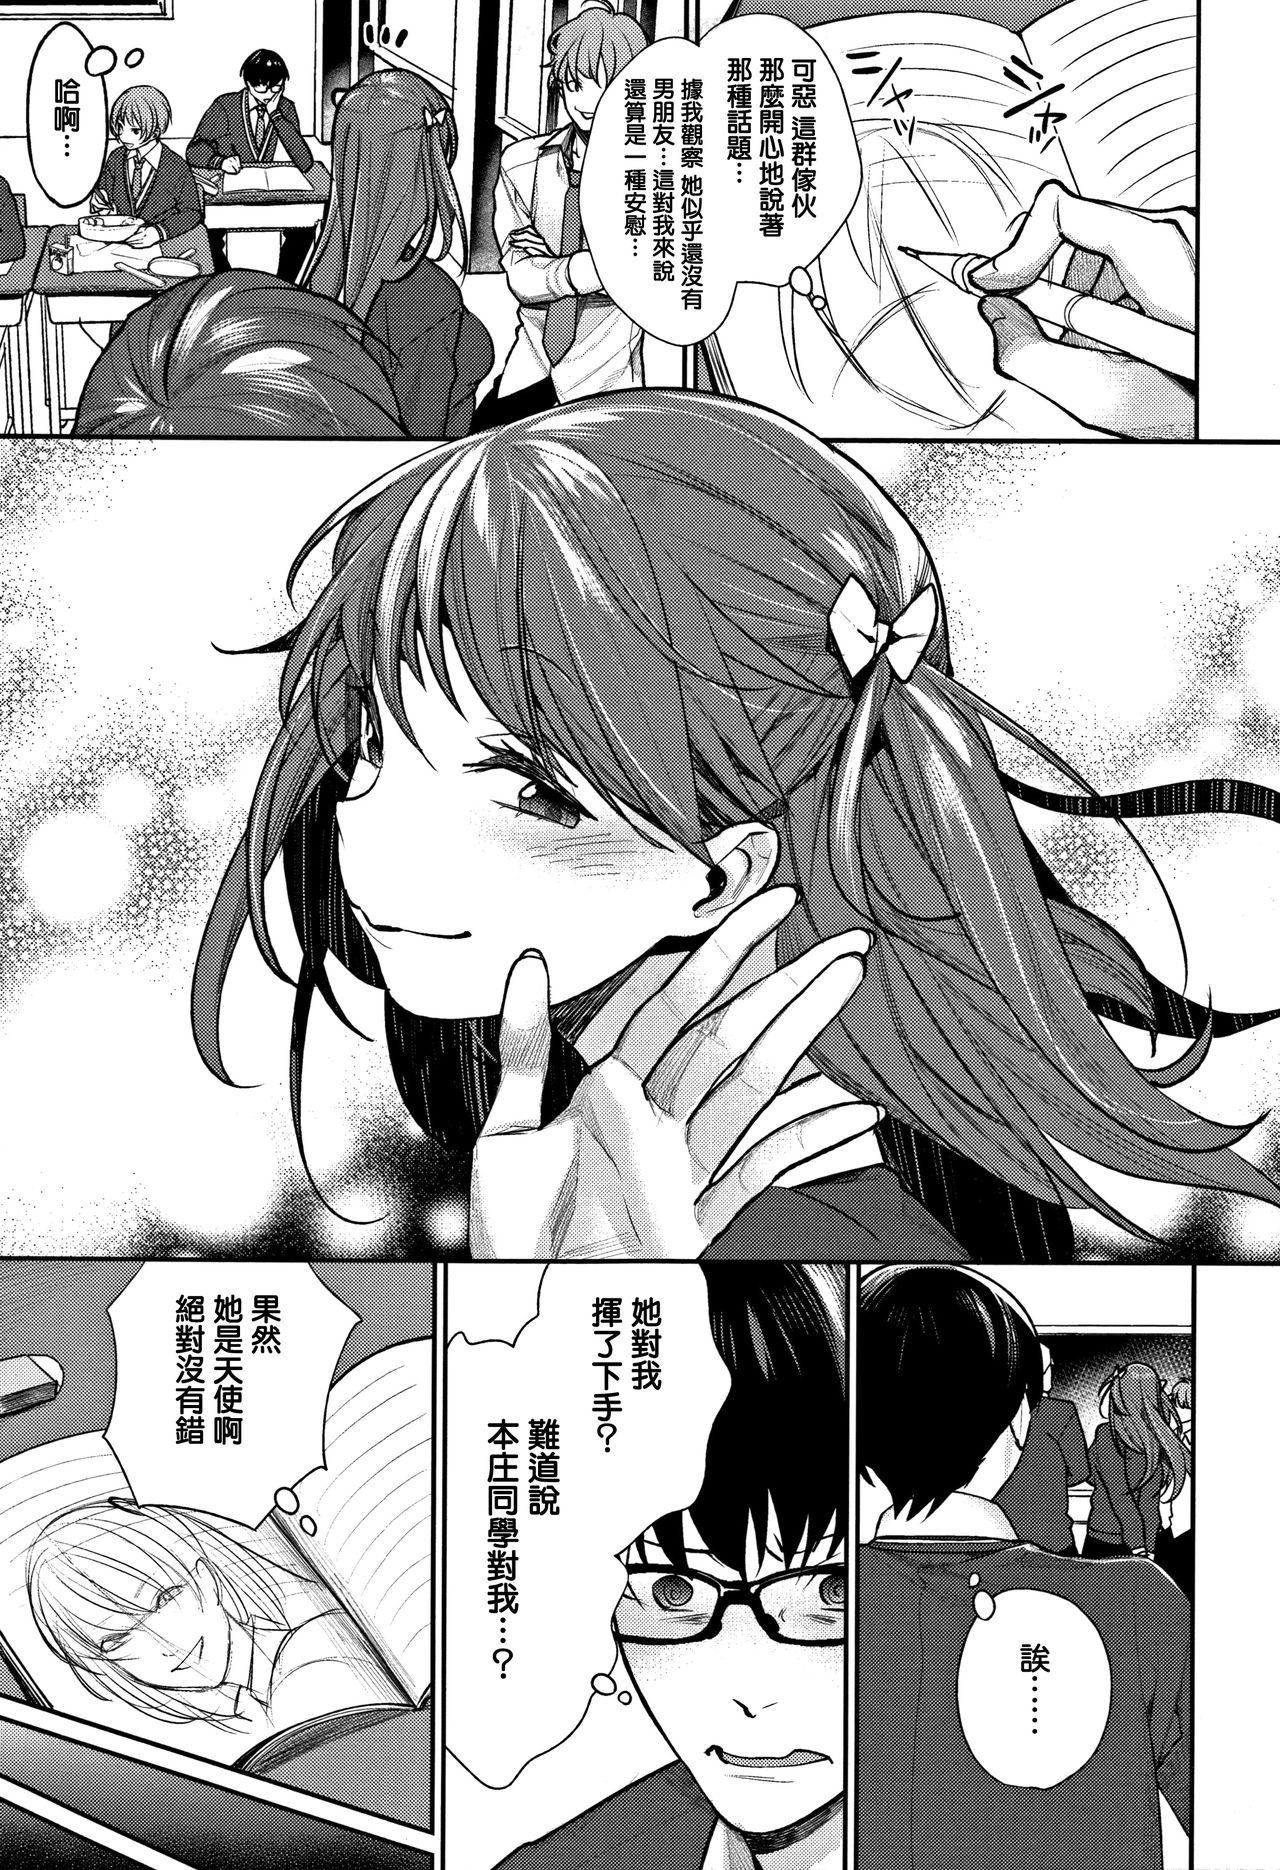 Sucking [MGMEE] Bokura no Etude - Our H Chu Do Ch.1-7 [Chinese] [無邪気漢化組] Best Blowjobs Ever - Page 7